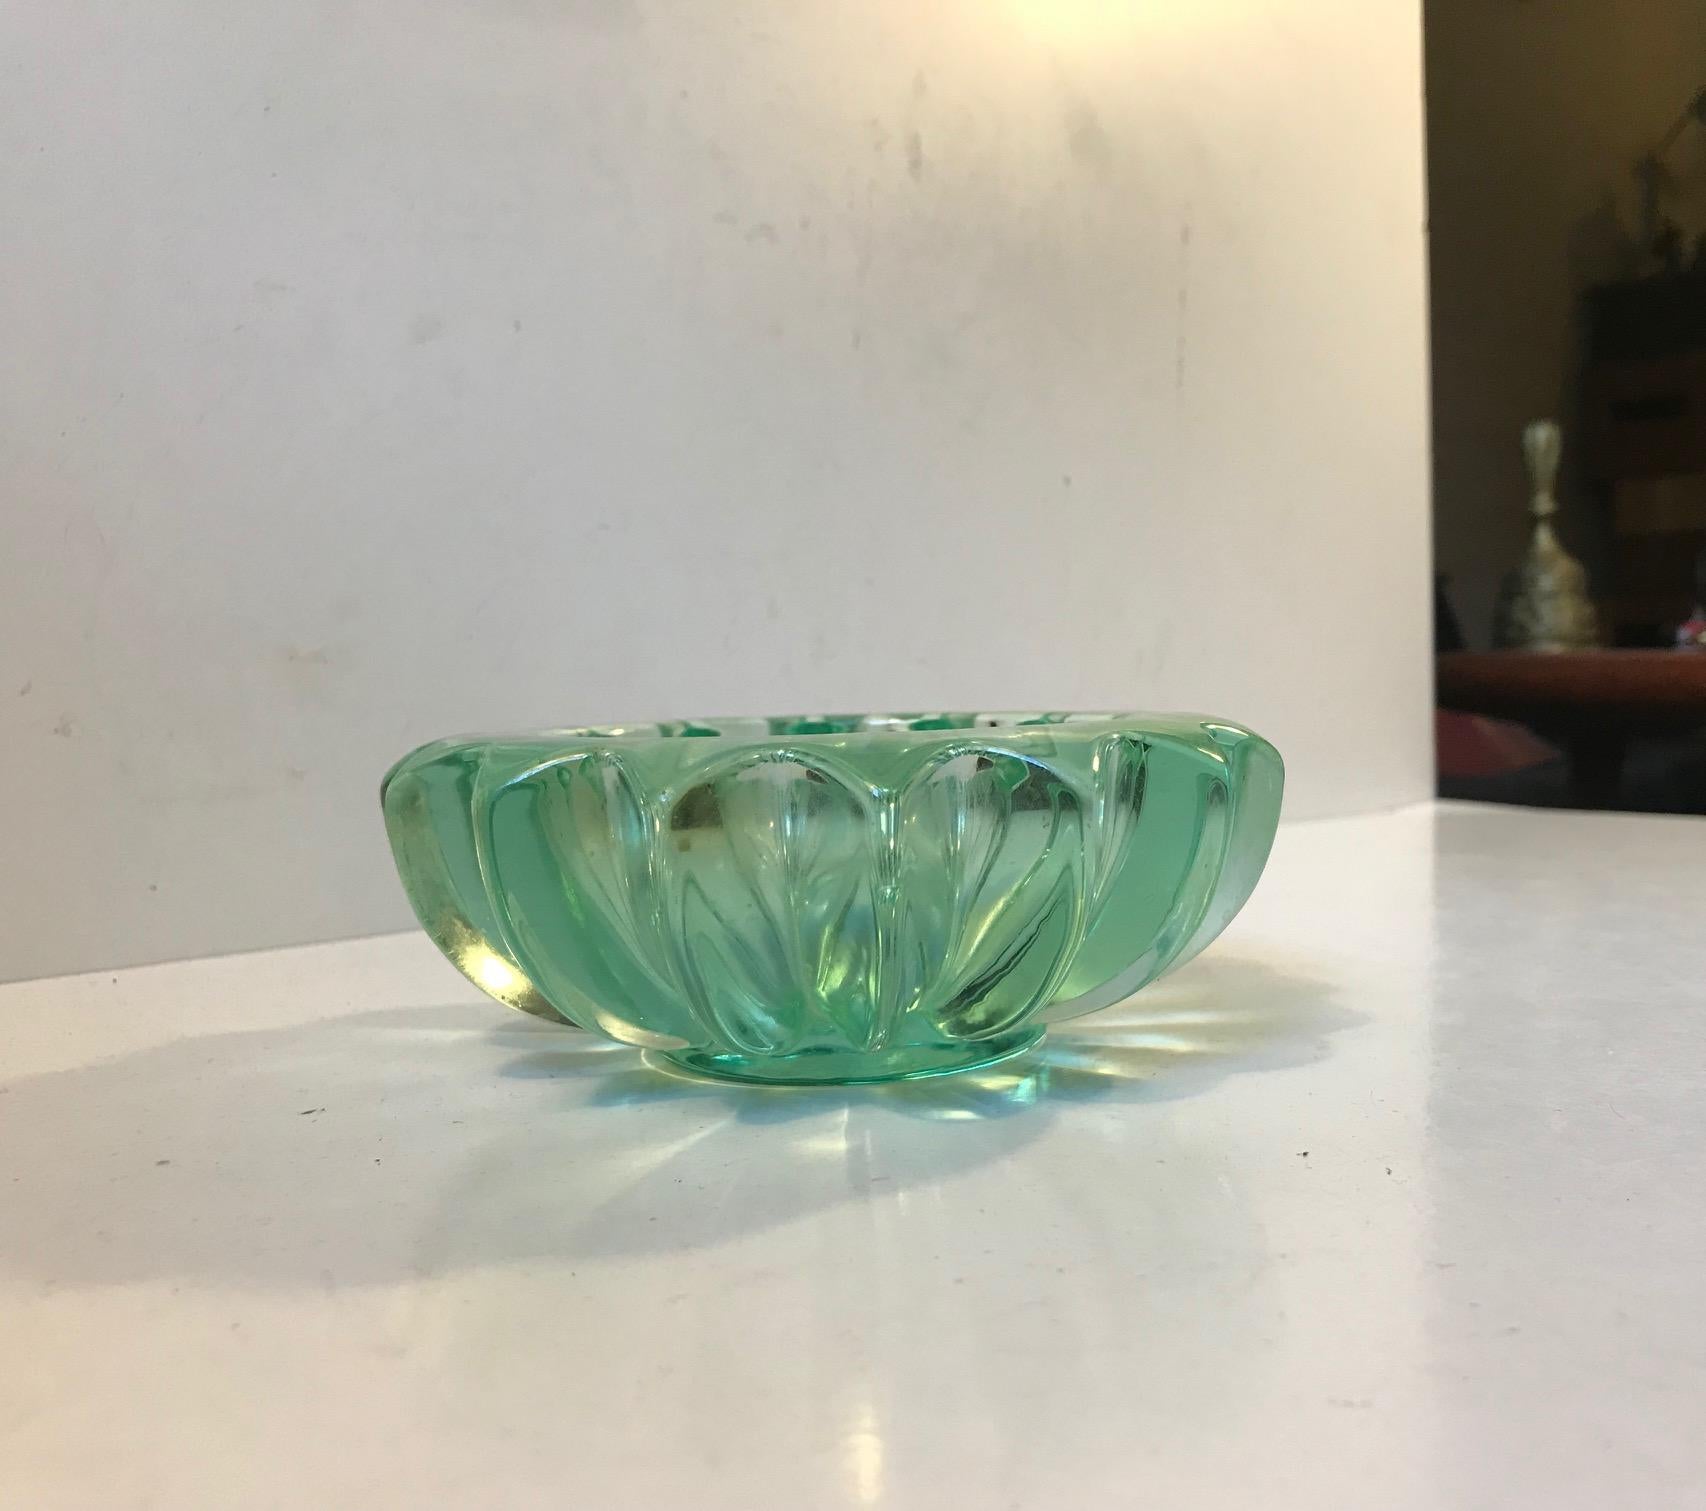 Thick glass dish or ashtray designed by Pierre D’avesn during the 1940s. It resembles a shooting star. Star-bottom shooting up through the body of the vase.